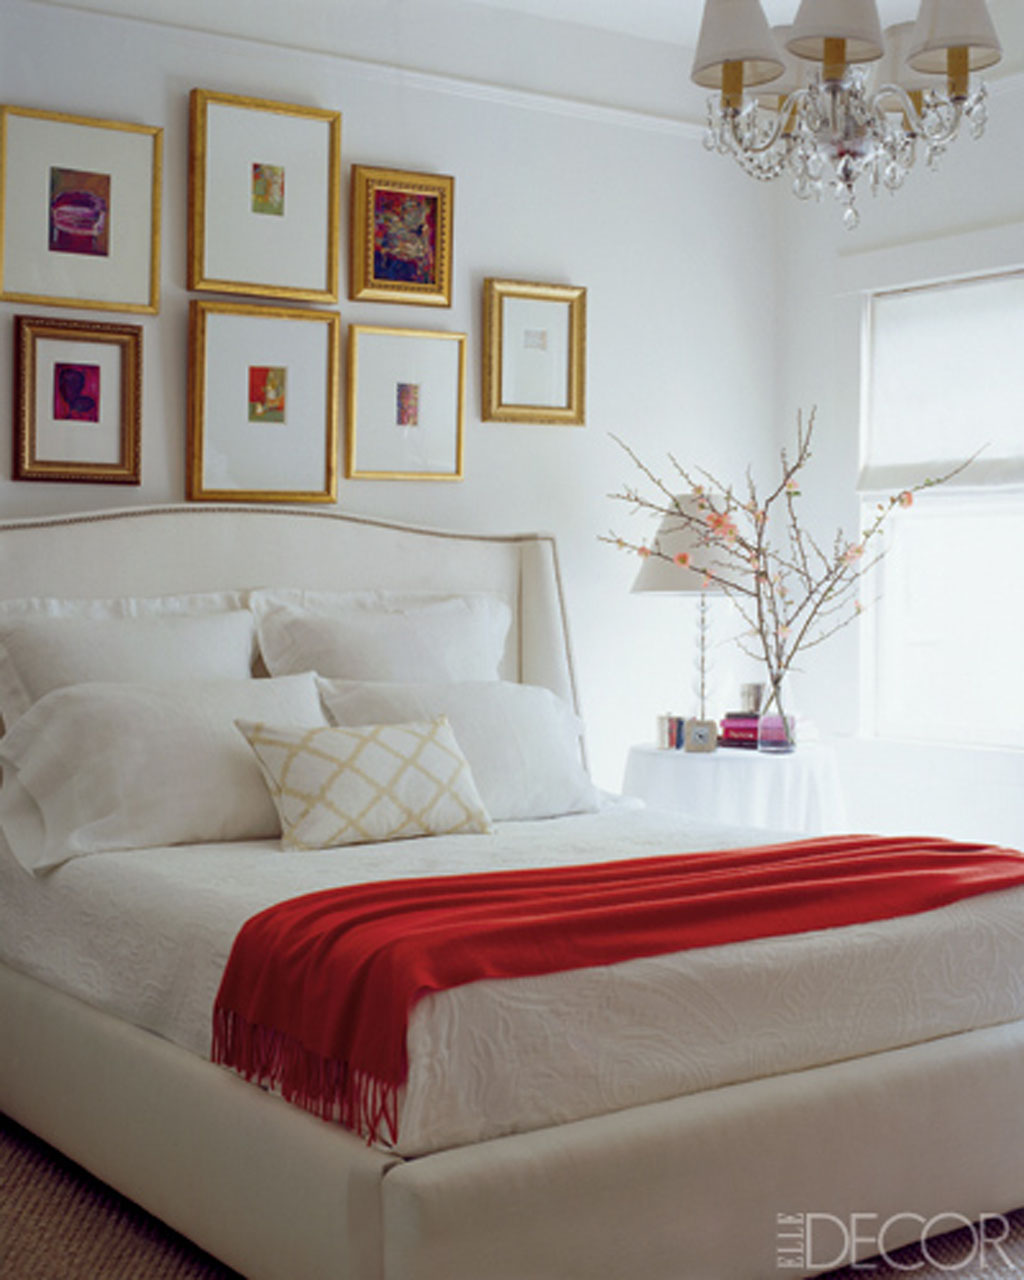 charm-red-white-bedroom-from-decor-interior-design-ideas